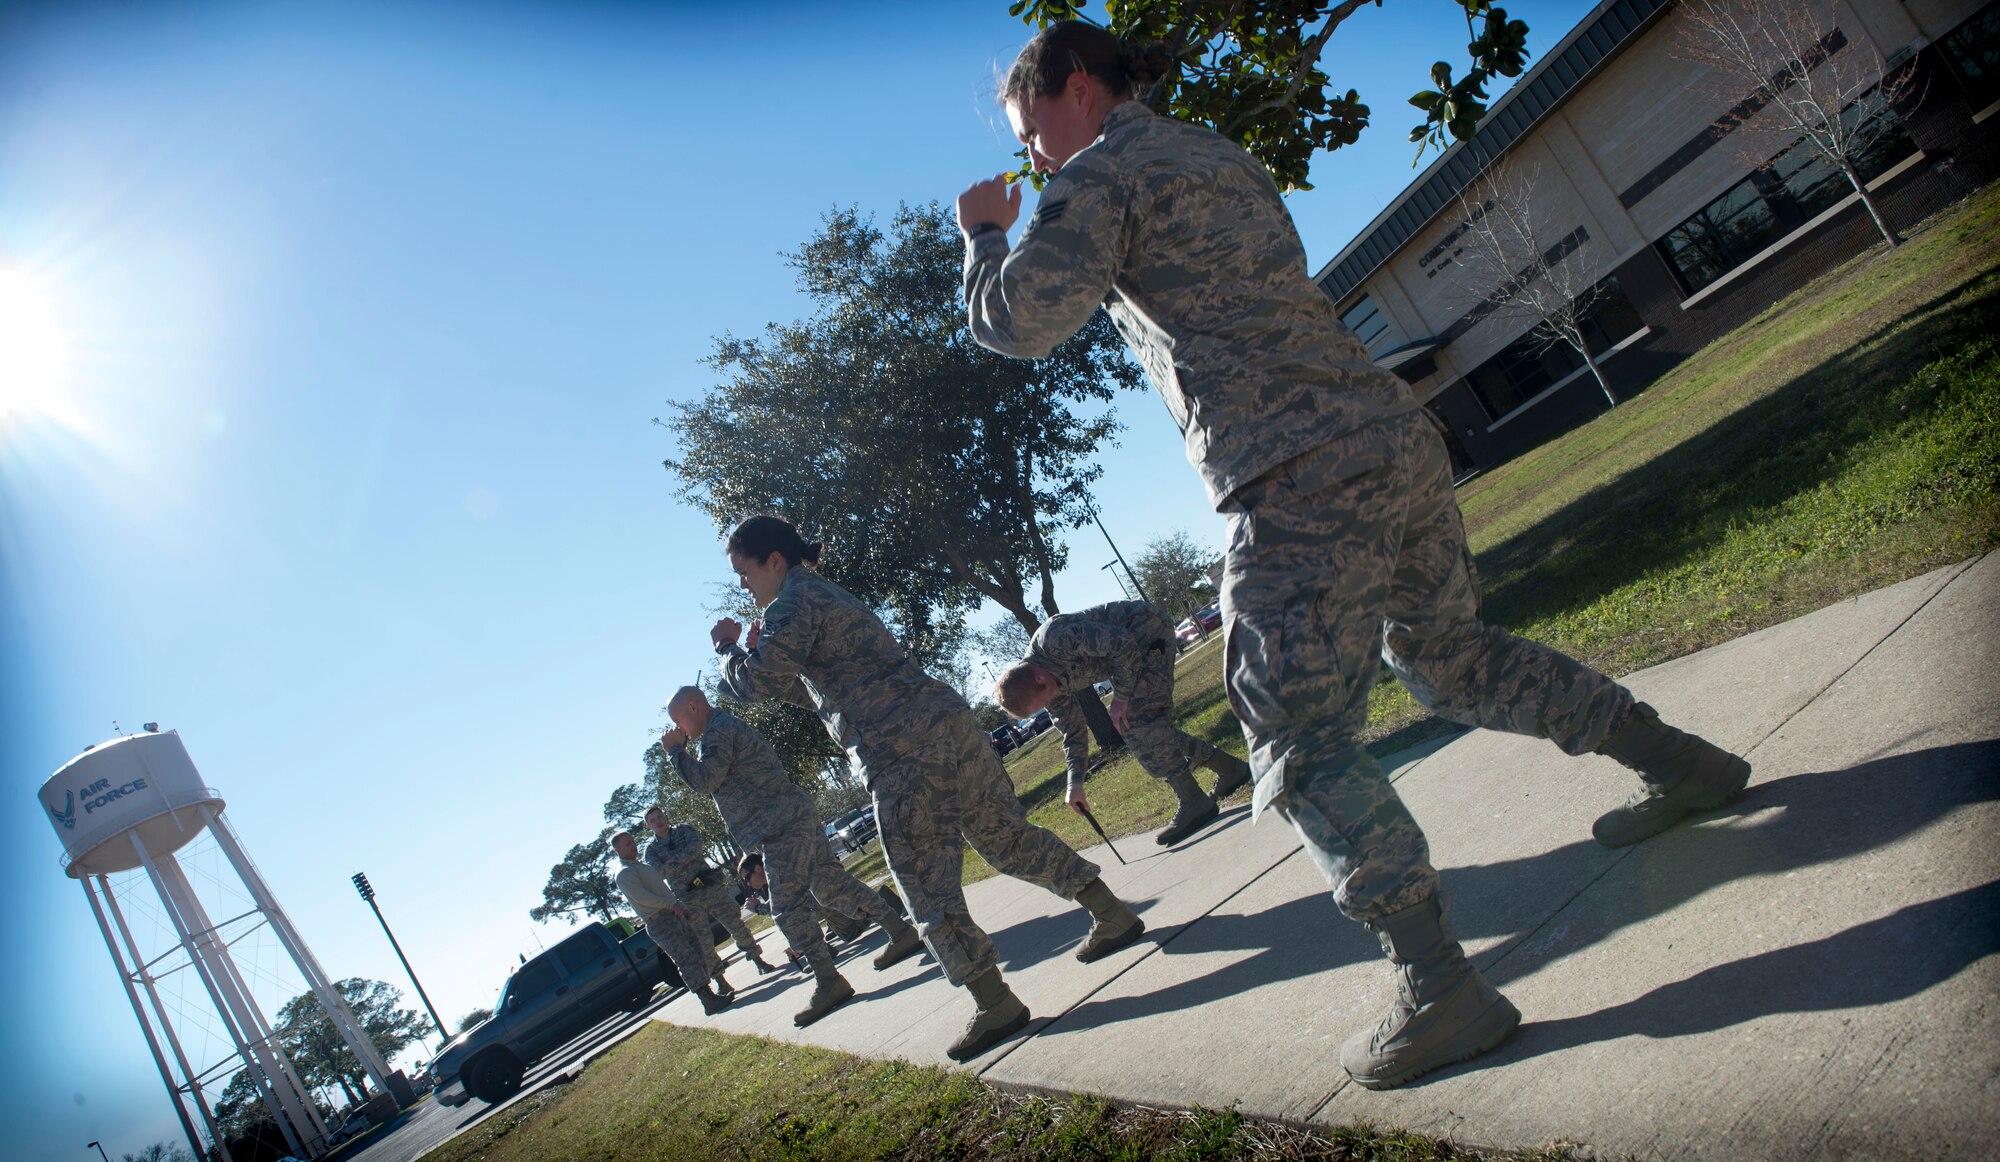 Airmen with the 1st Special Operations Security Forces Squadron practice their baton skills during baton training at Hurlburt Field, Fla., Feb. 10, 2016. Security Forces personnel are required to complete the training annually to ensure they are properly trained and capable of apprehending a suspect. (U.S. Air Force photo by Senior Airman Krystal M. Garrett)